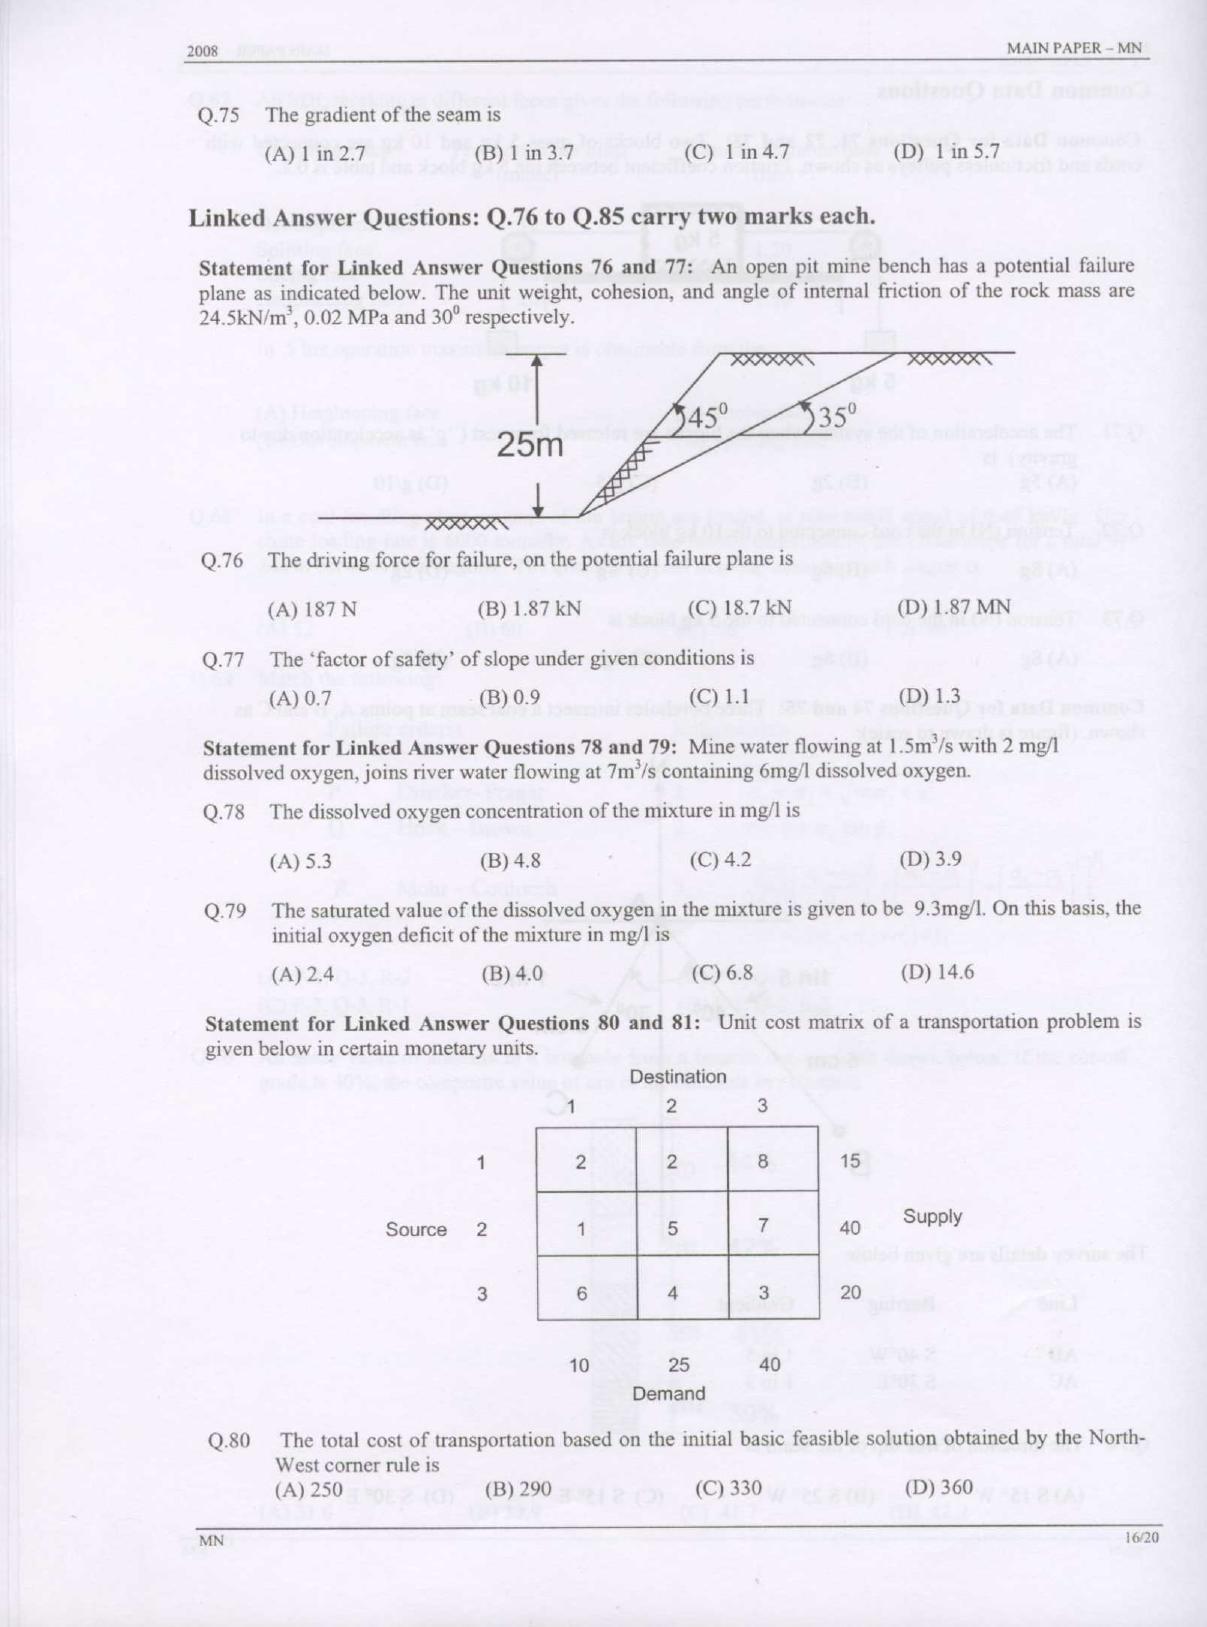 GATE 2008 Mining Engineering (MN) Question Paper with Answer Key - Page 16